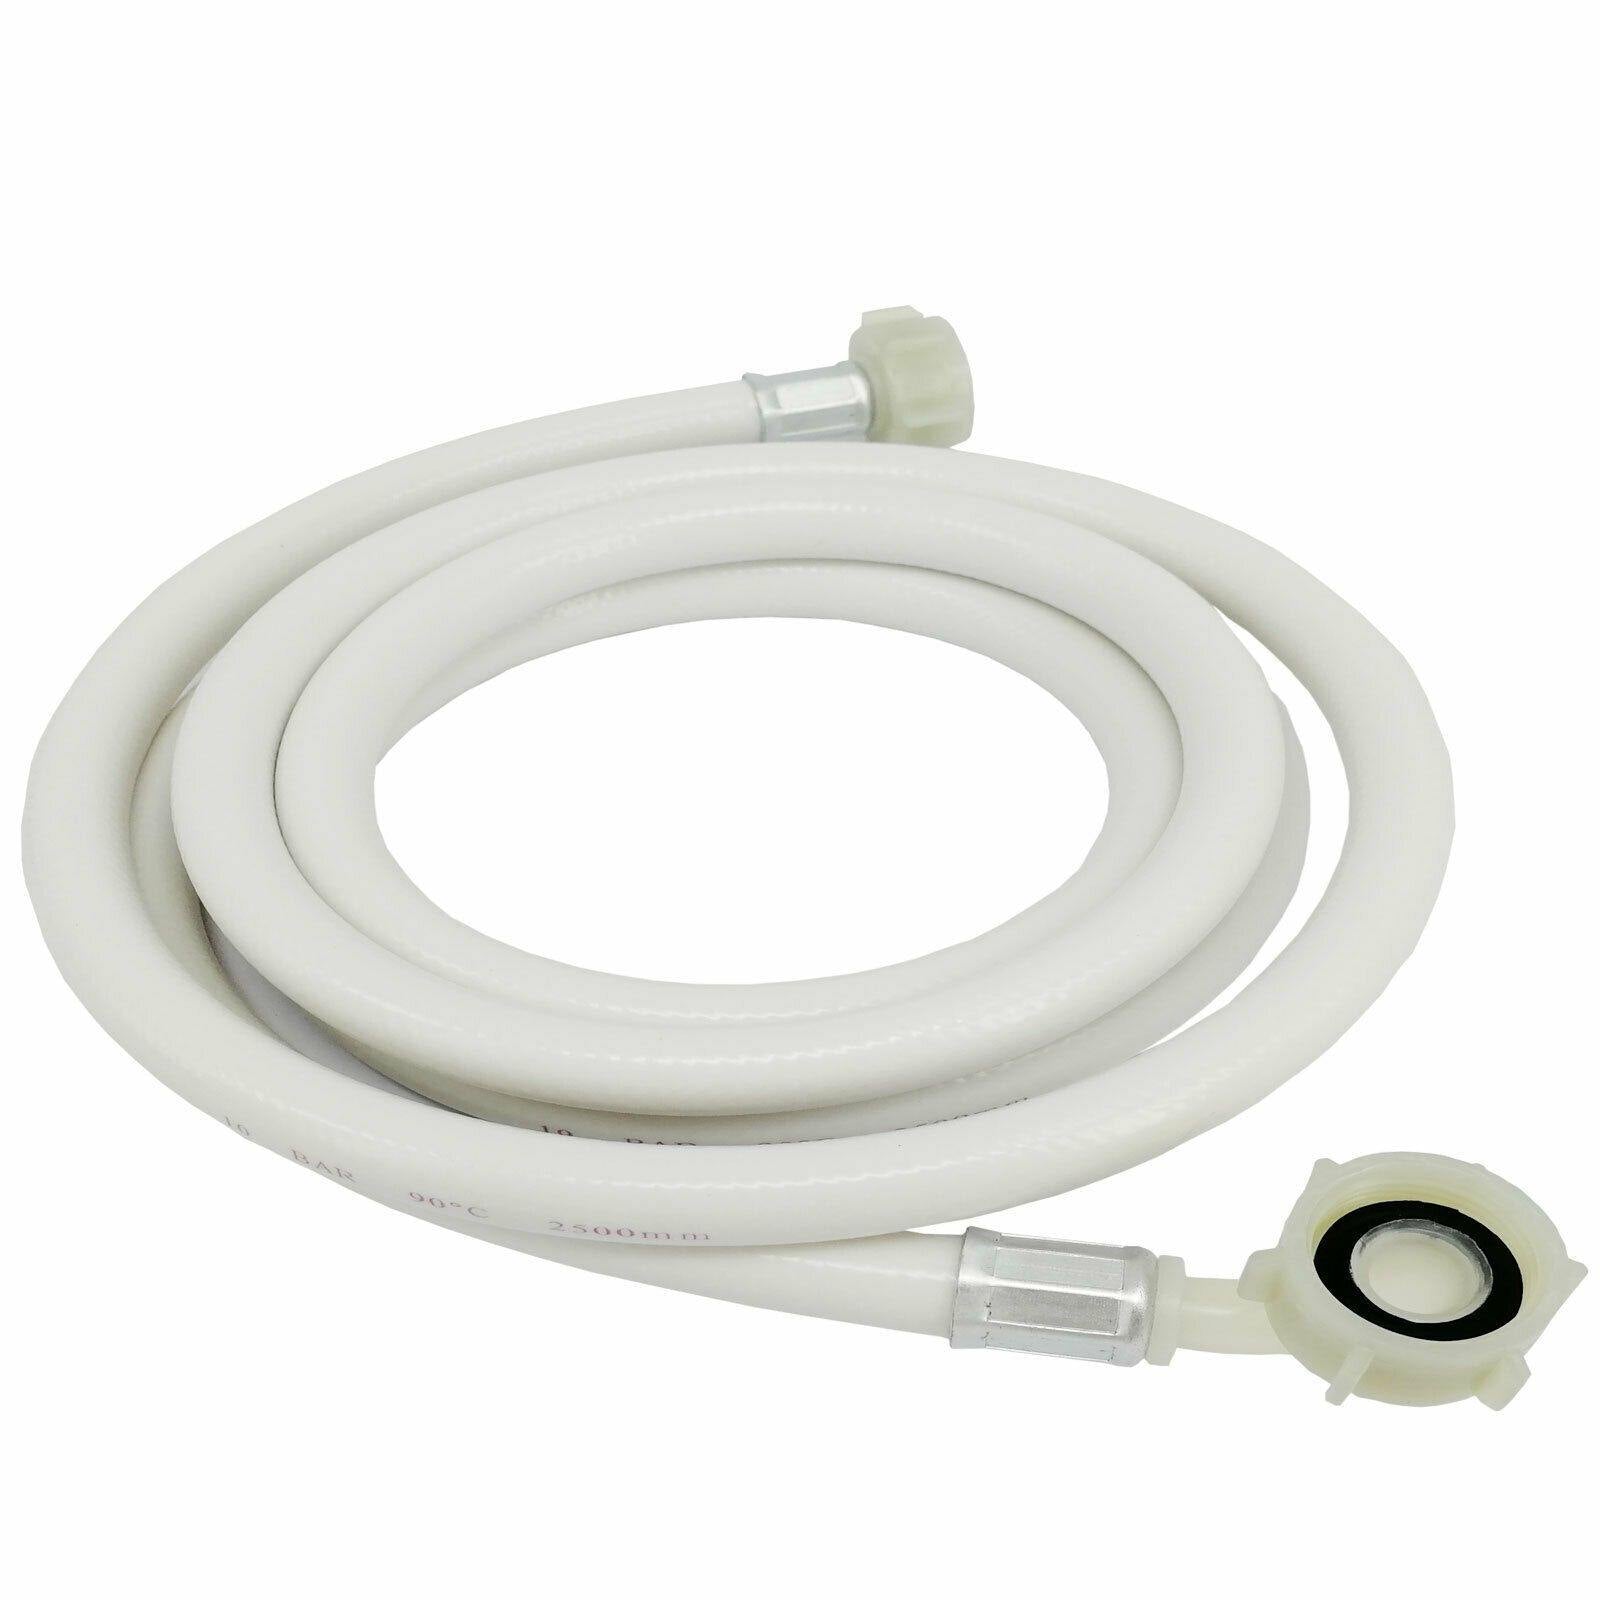 Washing Machine Hot / Cold Water Inlet Hose 2.5M For Fisher & Paykel Samsung Sparesbarn